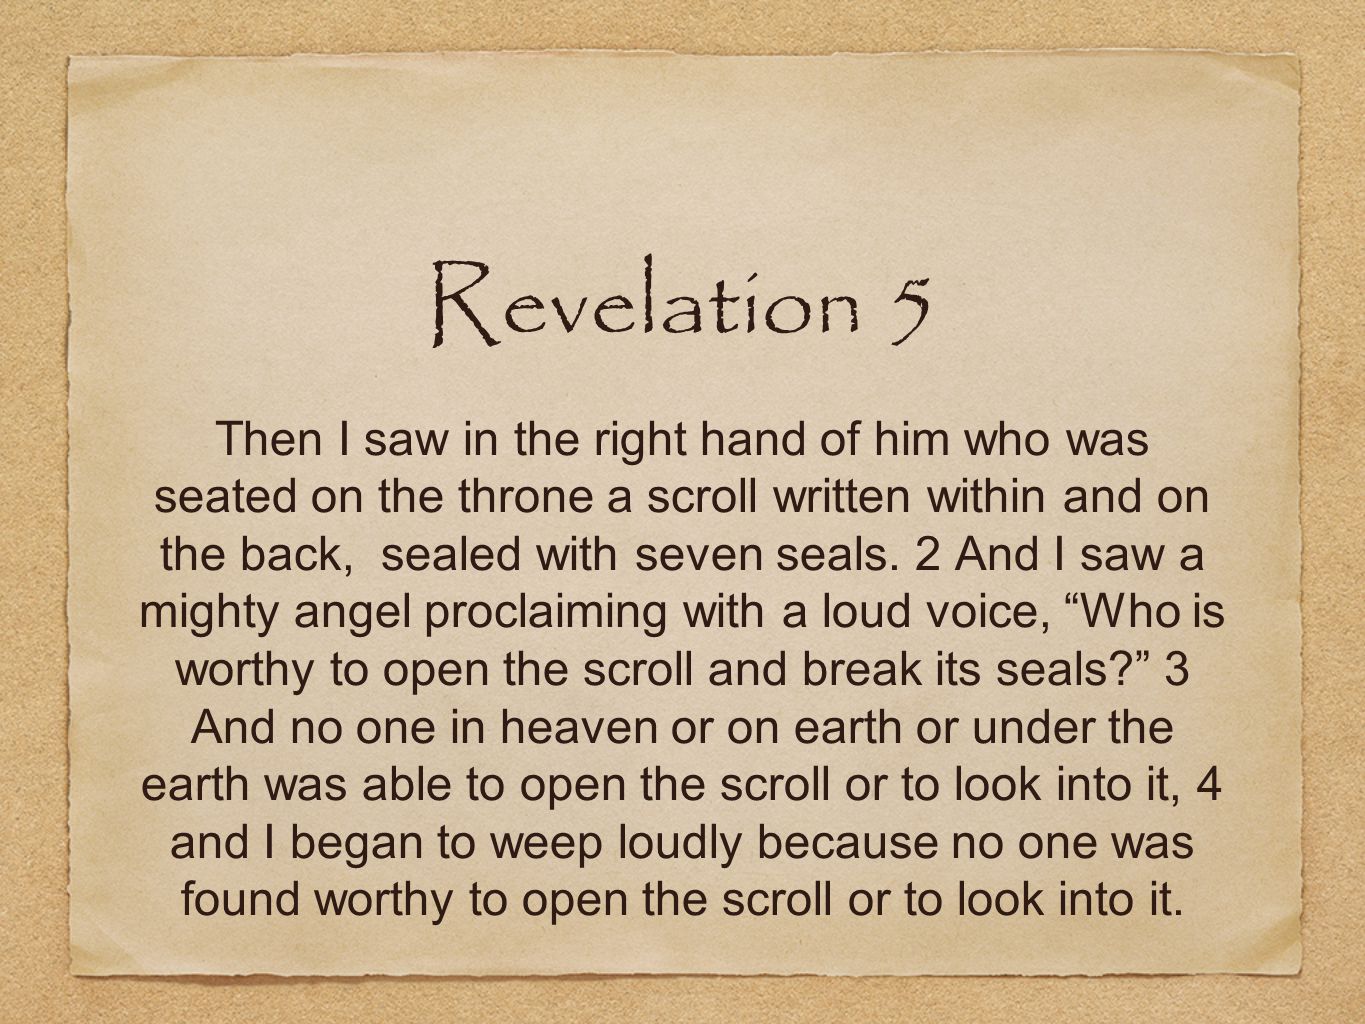 Revelation 5 Then I saw in the right hand of him who was seated on the throne a scroll written within and on the back, sealed with seven seals.